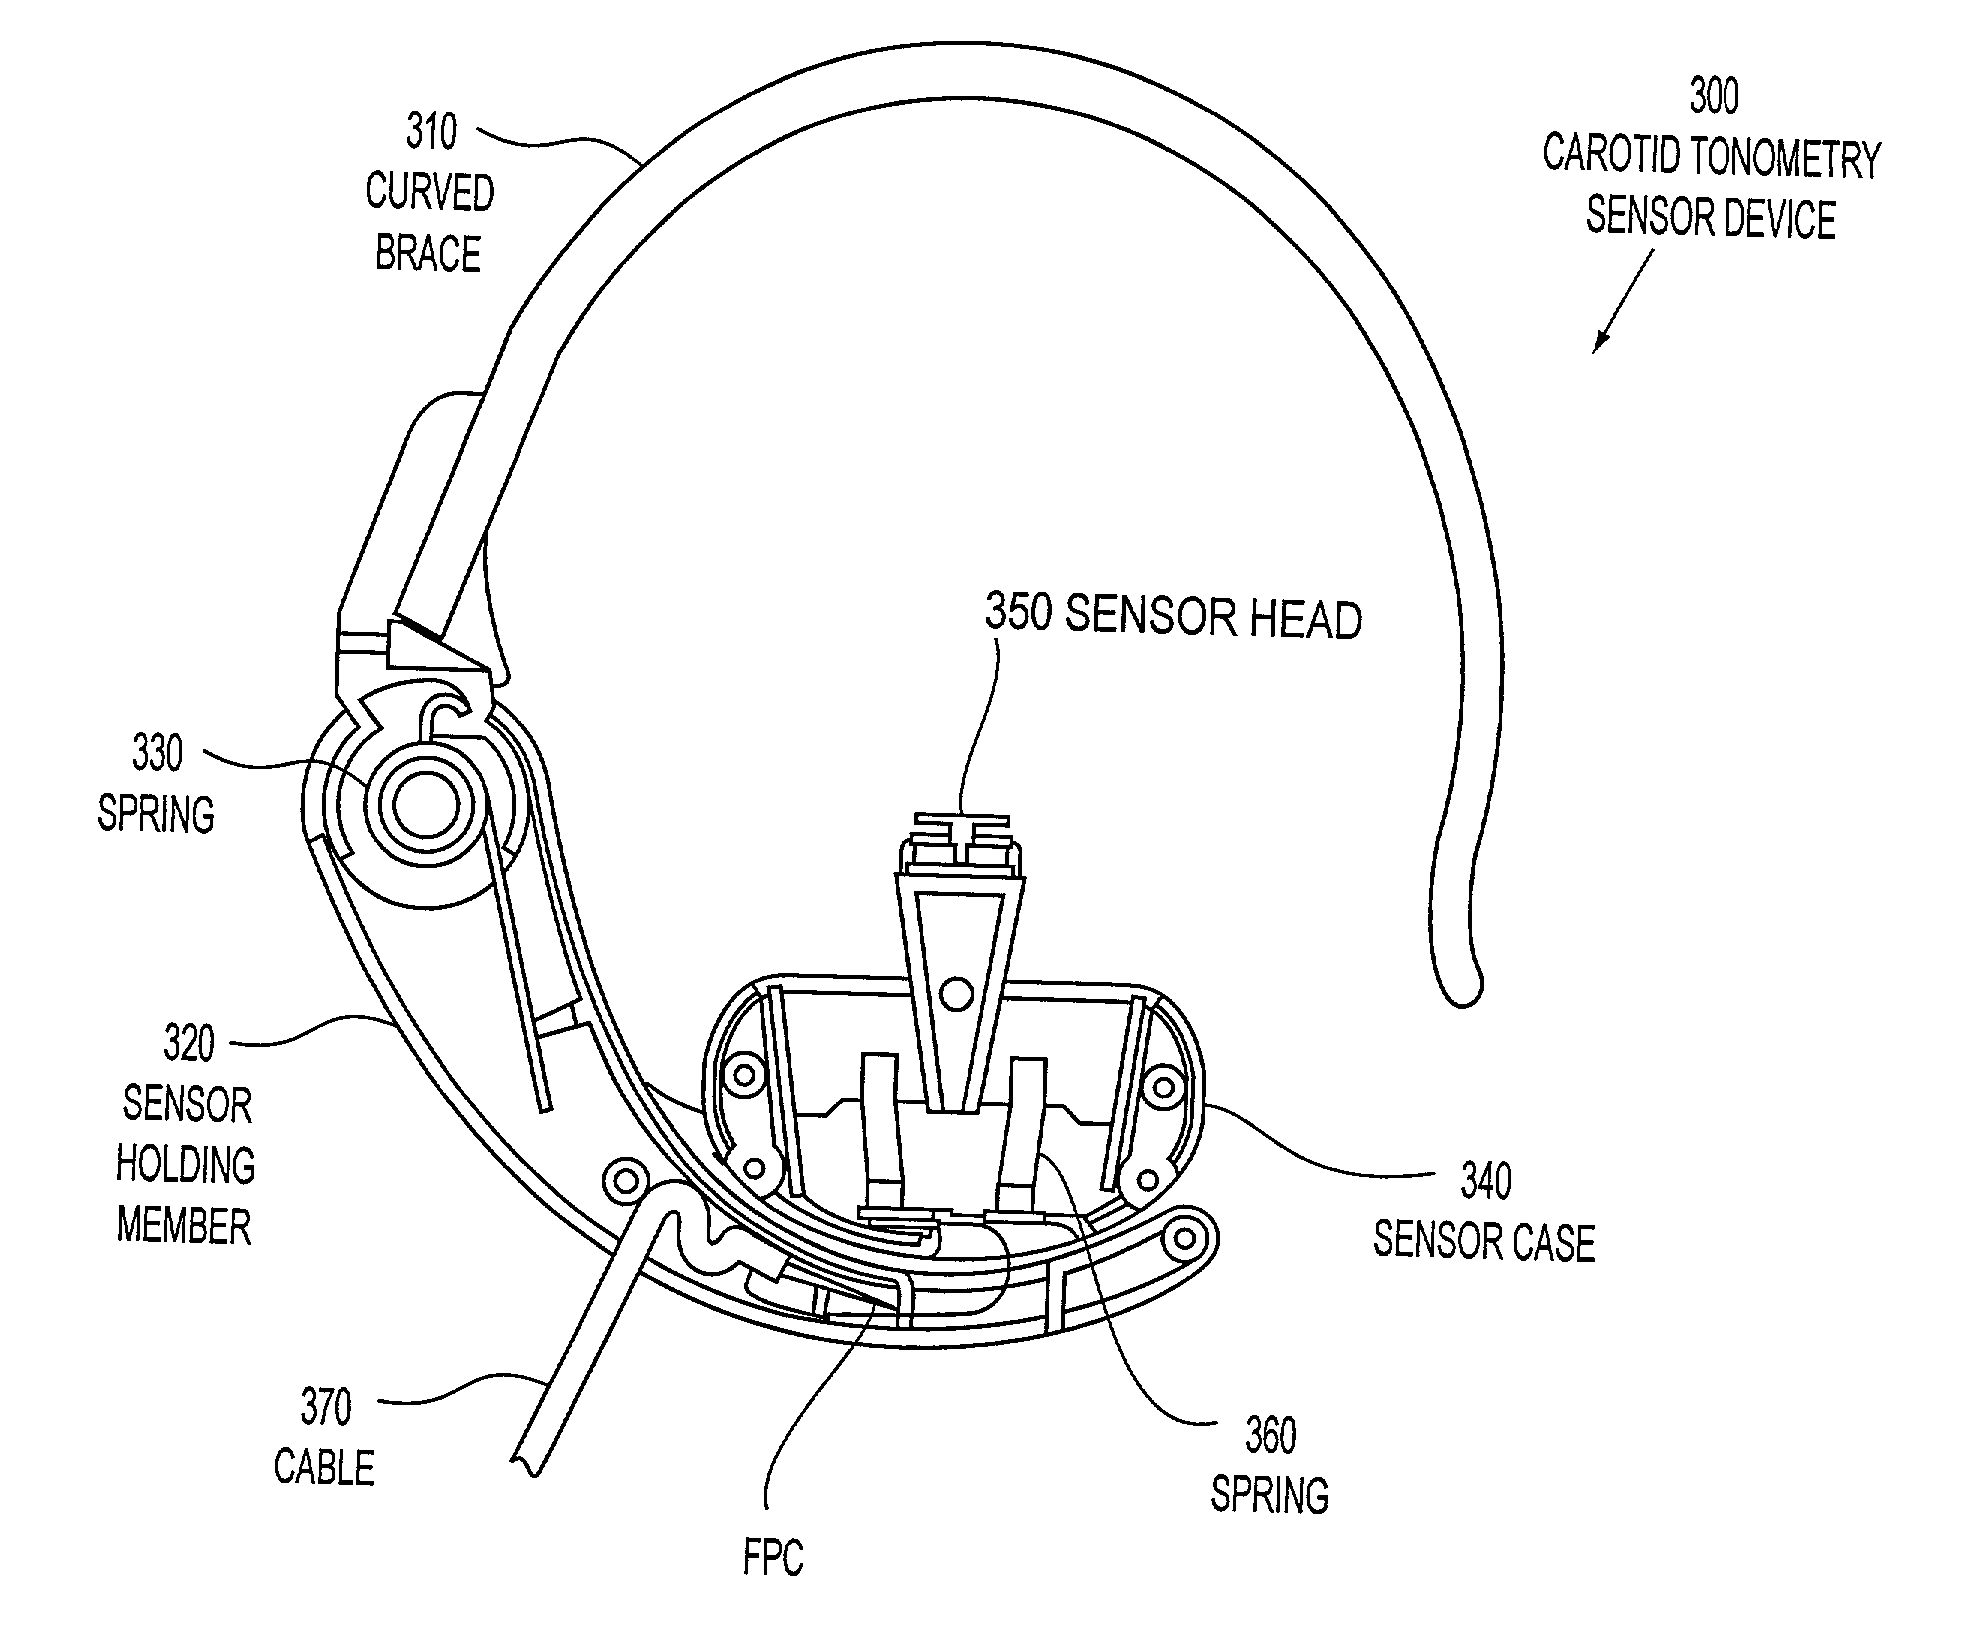 Systems and methods for measuring pulse wave velocity and augmentation index